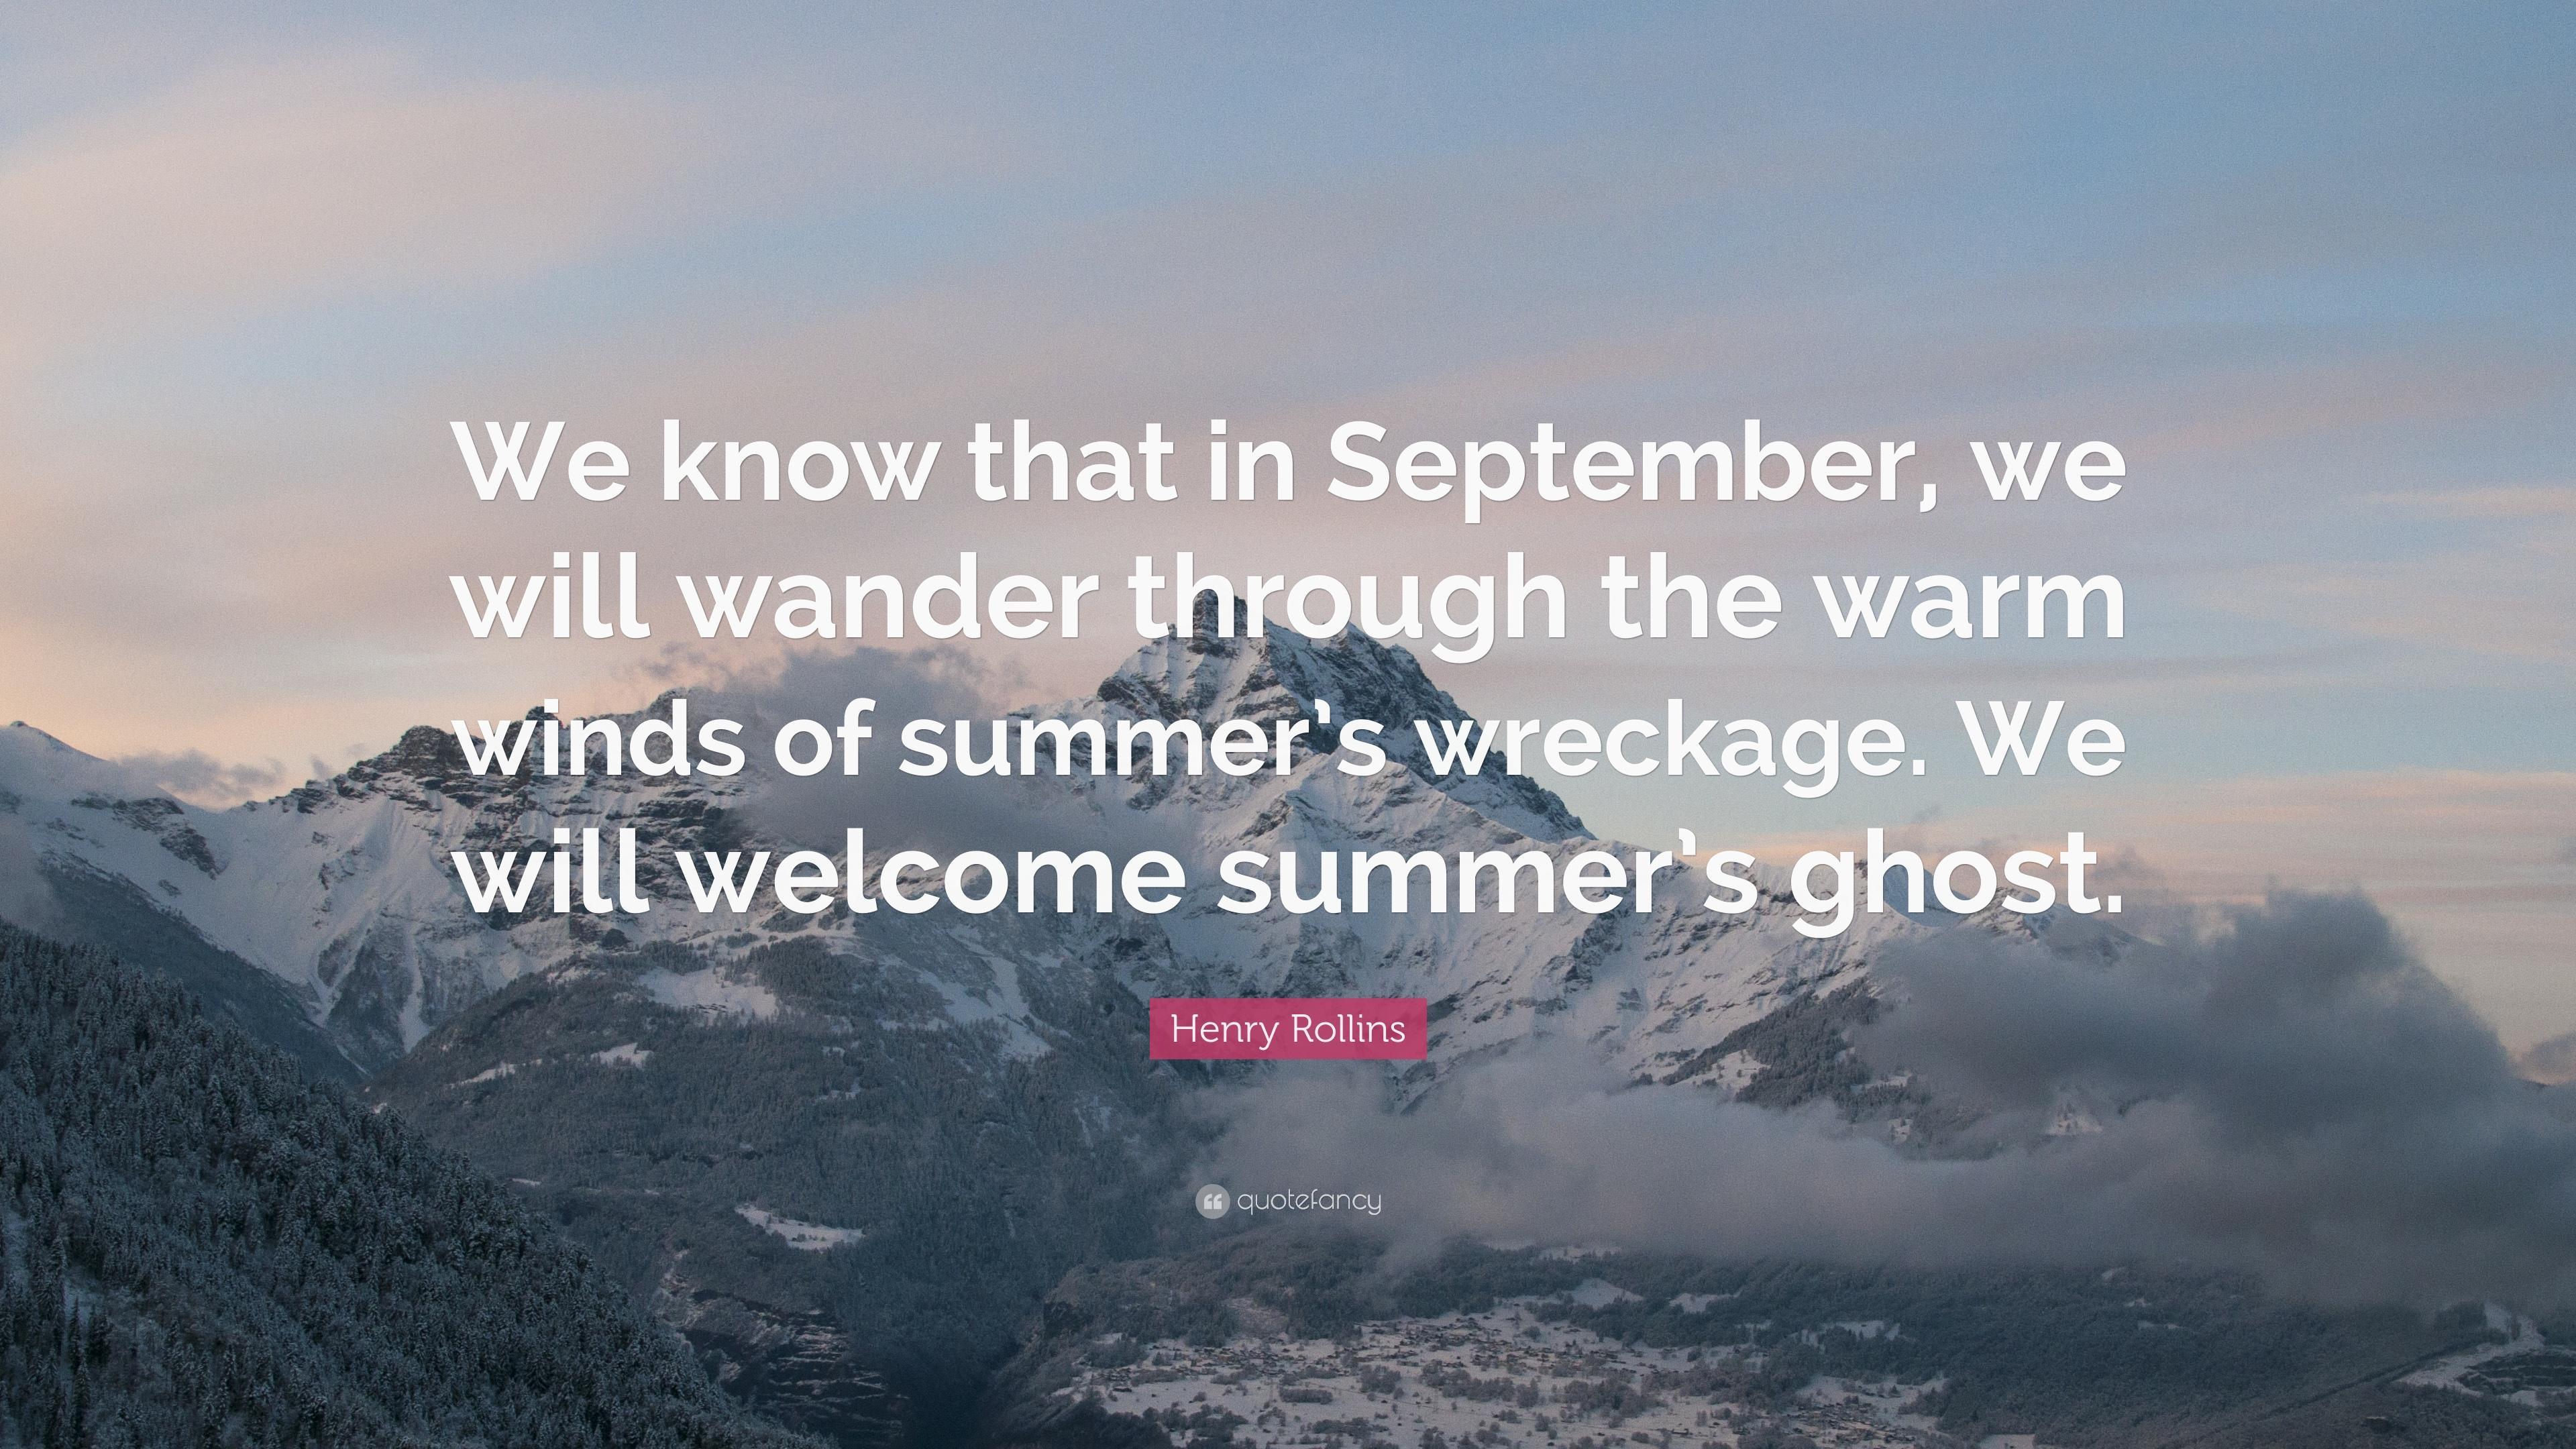 Henry Rollins Quote: “We know that in September, we will wander